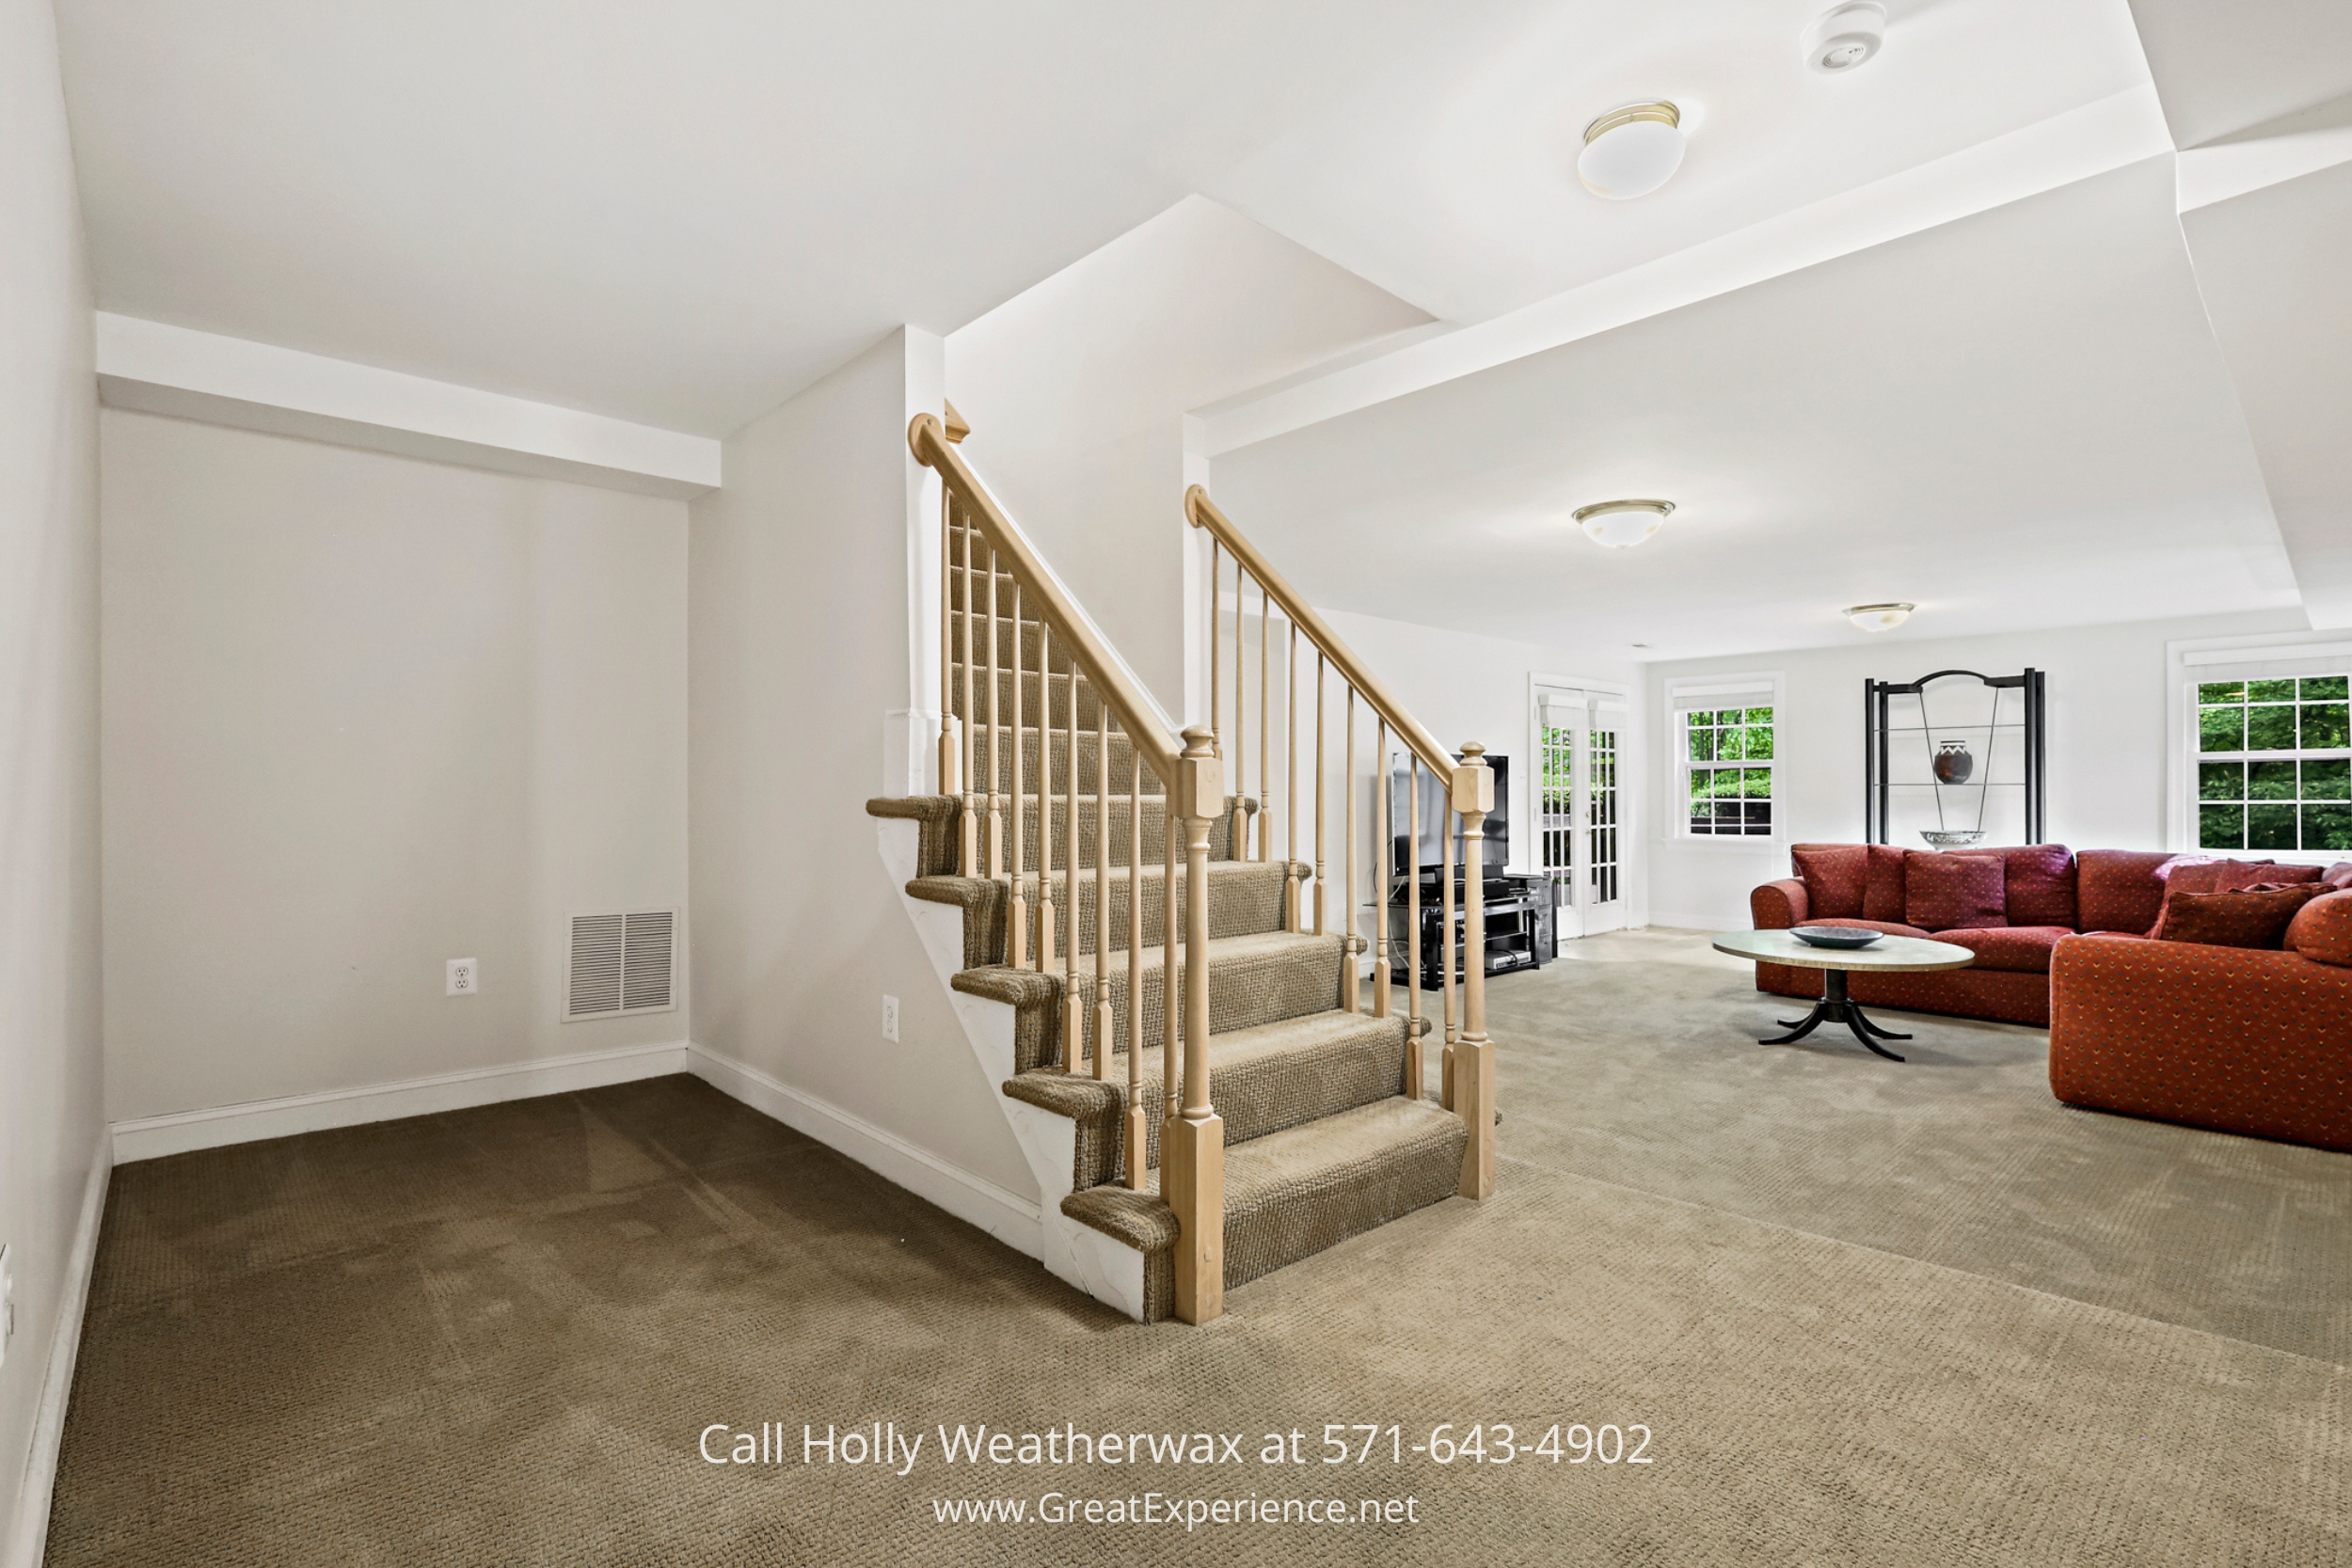 Spacious family room with abundant furniture and an elegant staircase